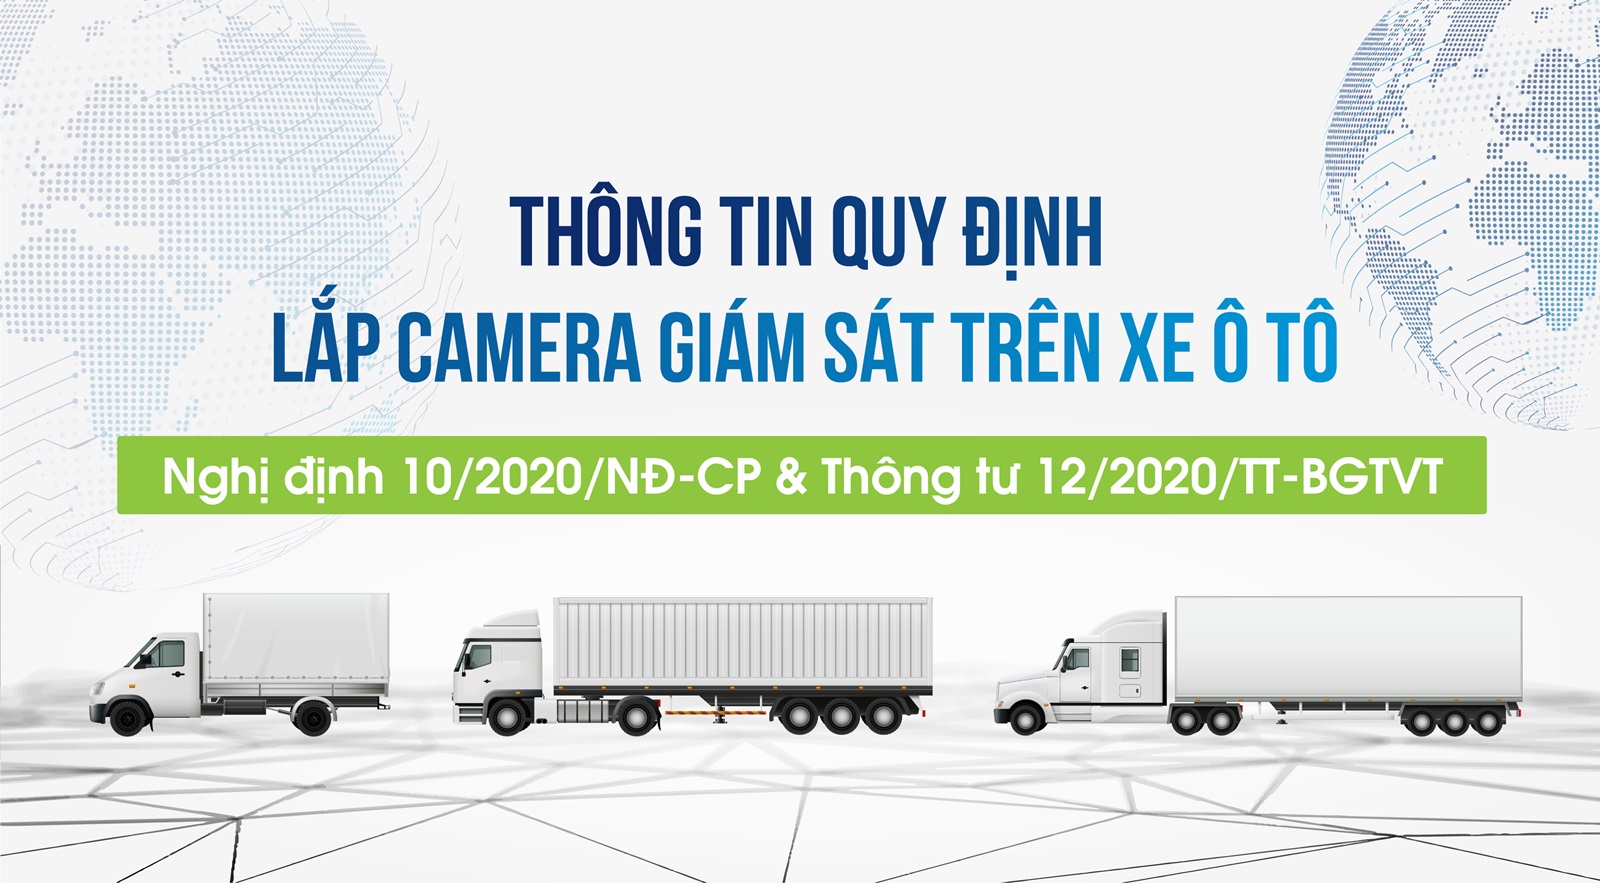 Quy-dinh-lap-camera-theo-nghi-dinh10-banner